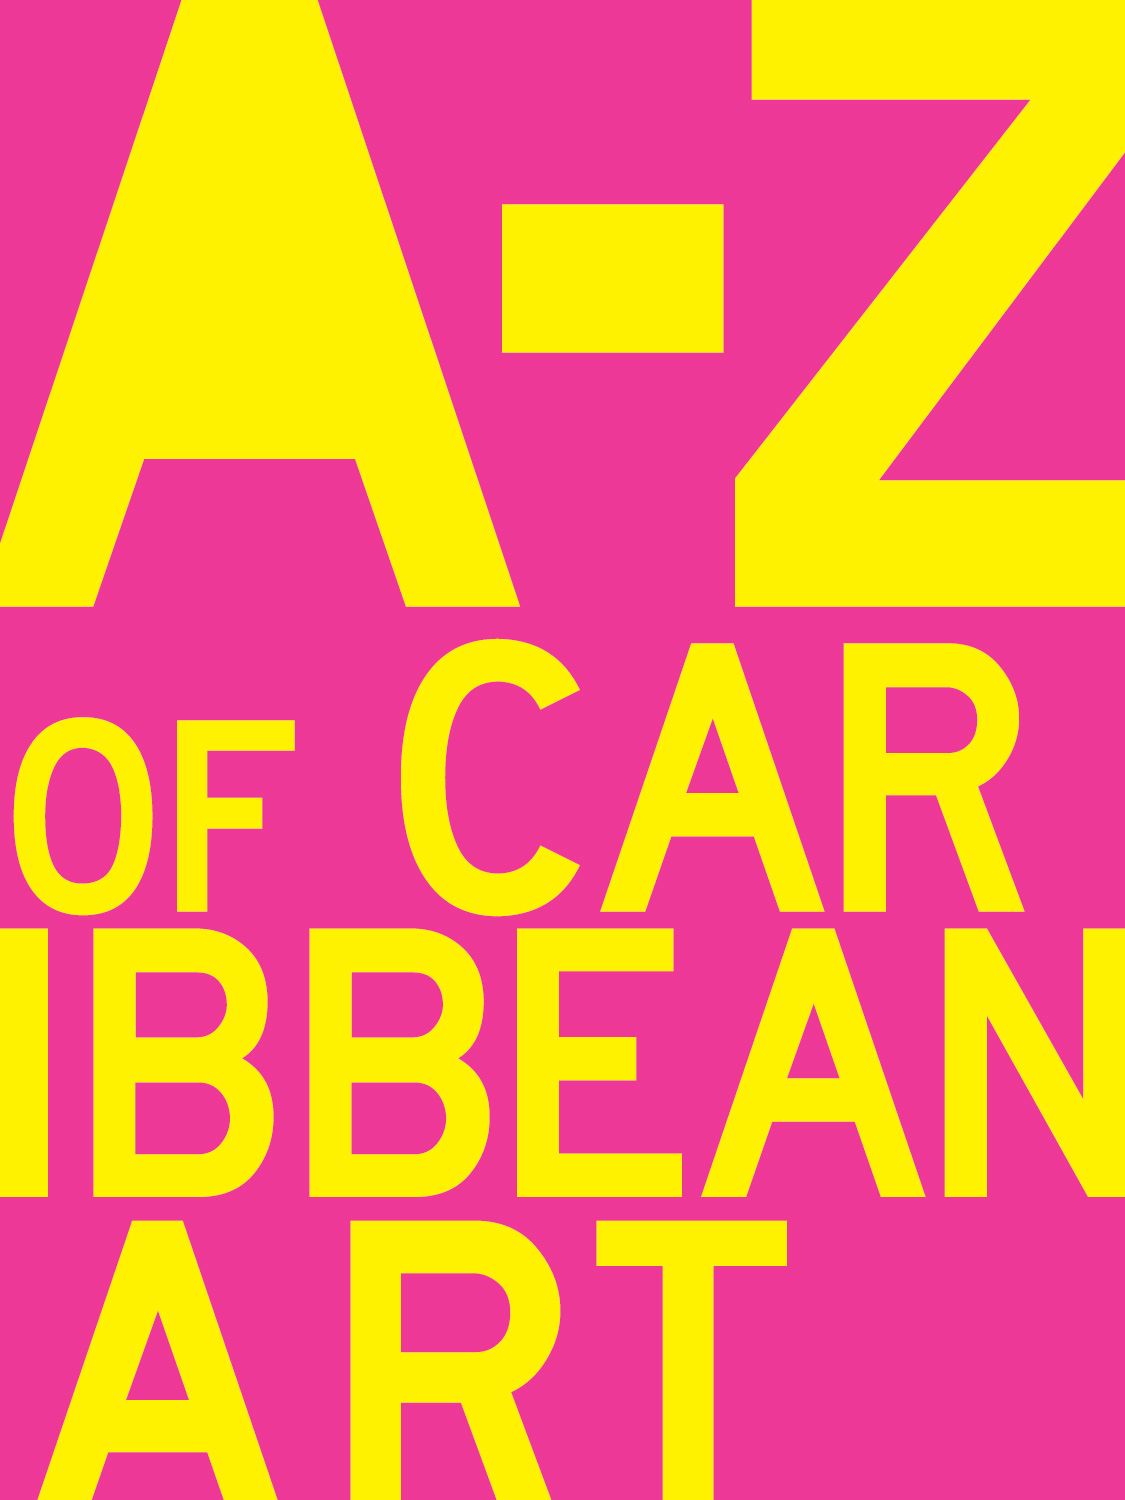 A to Z of Caribbean Art Notebook - Robert & Christopher Publishers